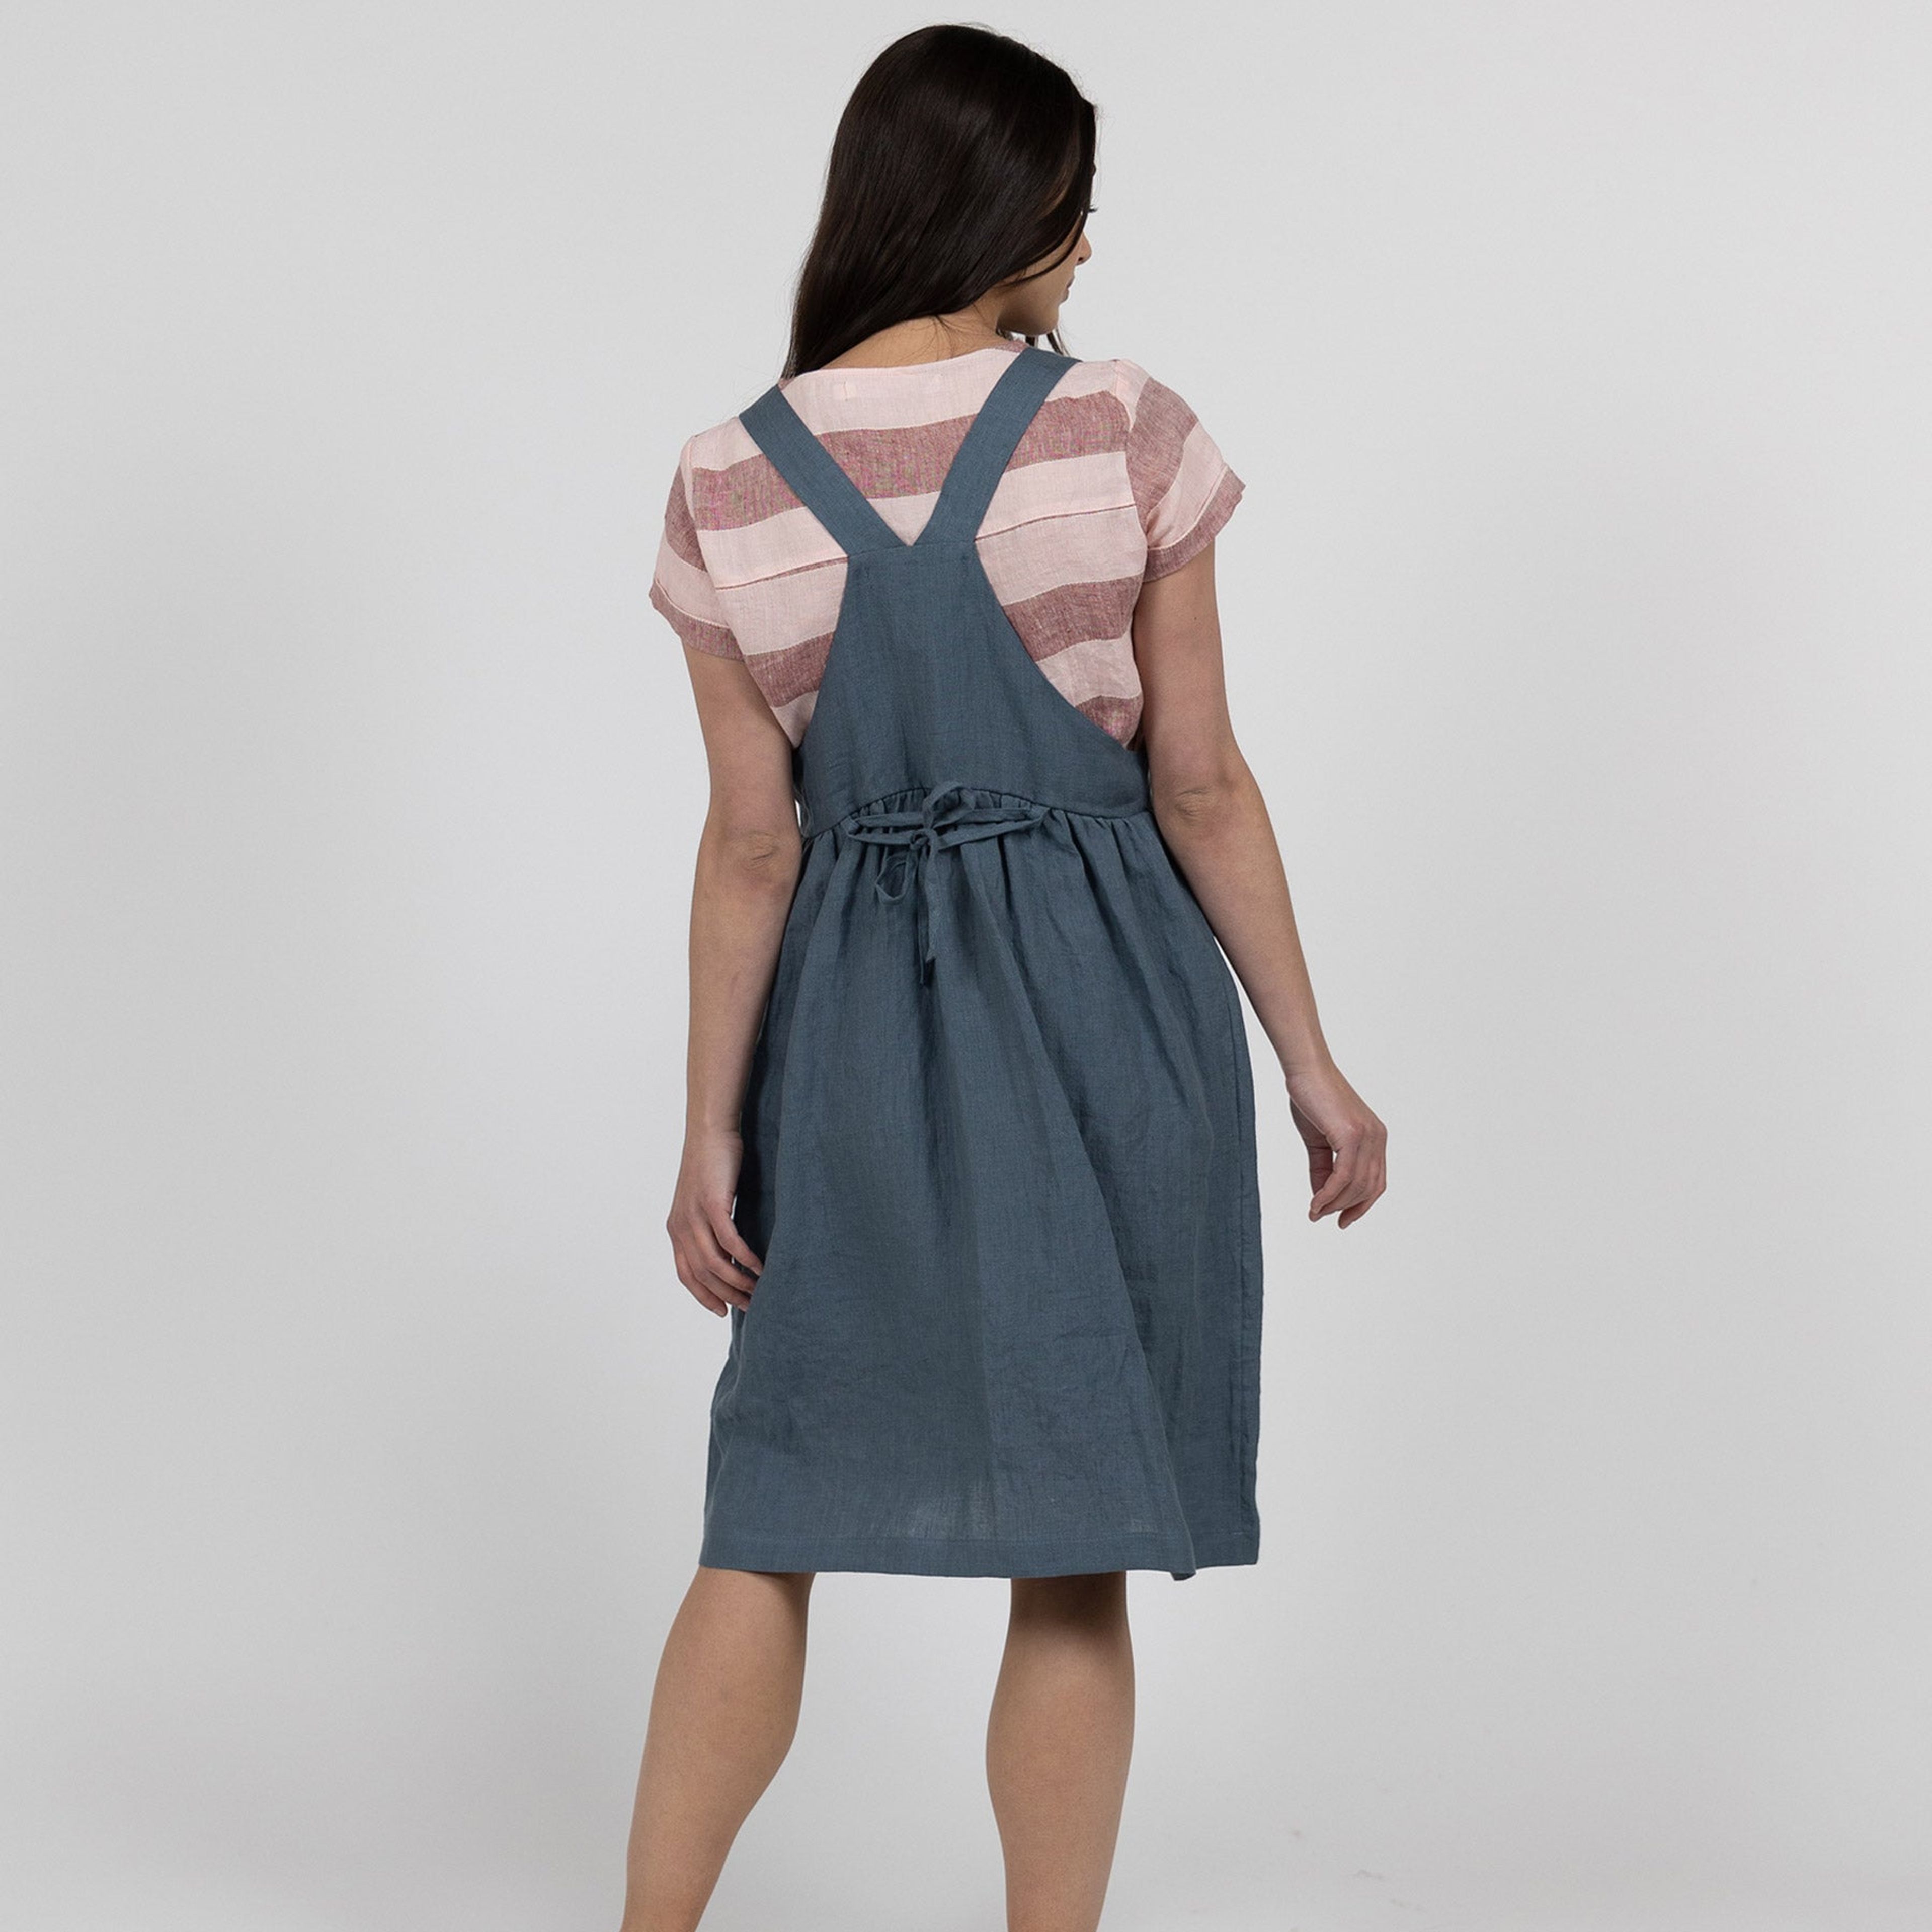 Model No.32 The Pinafore Dress in Prussian Blue